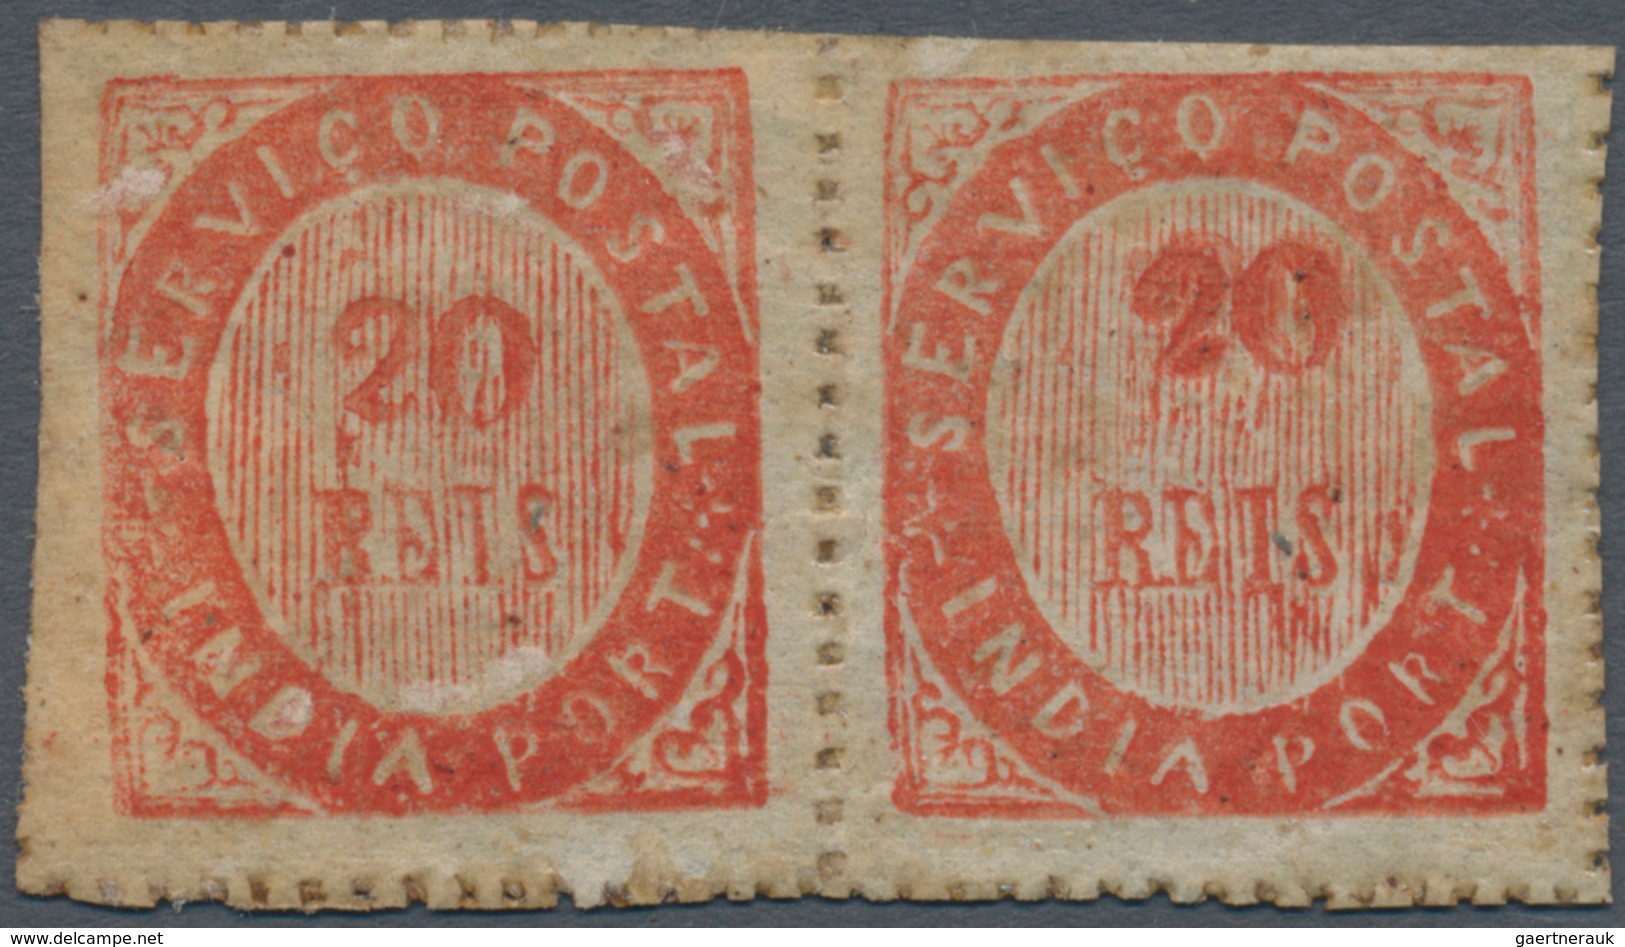 00428 Portugiesisch-Indien: 1873, Type I 20 R. Vermilion, A Horizontal Pair, Right Stamp With Double Impre - Portugees-Indië